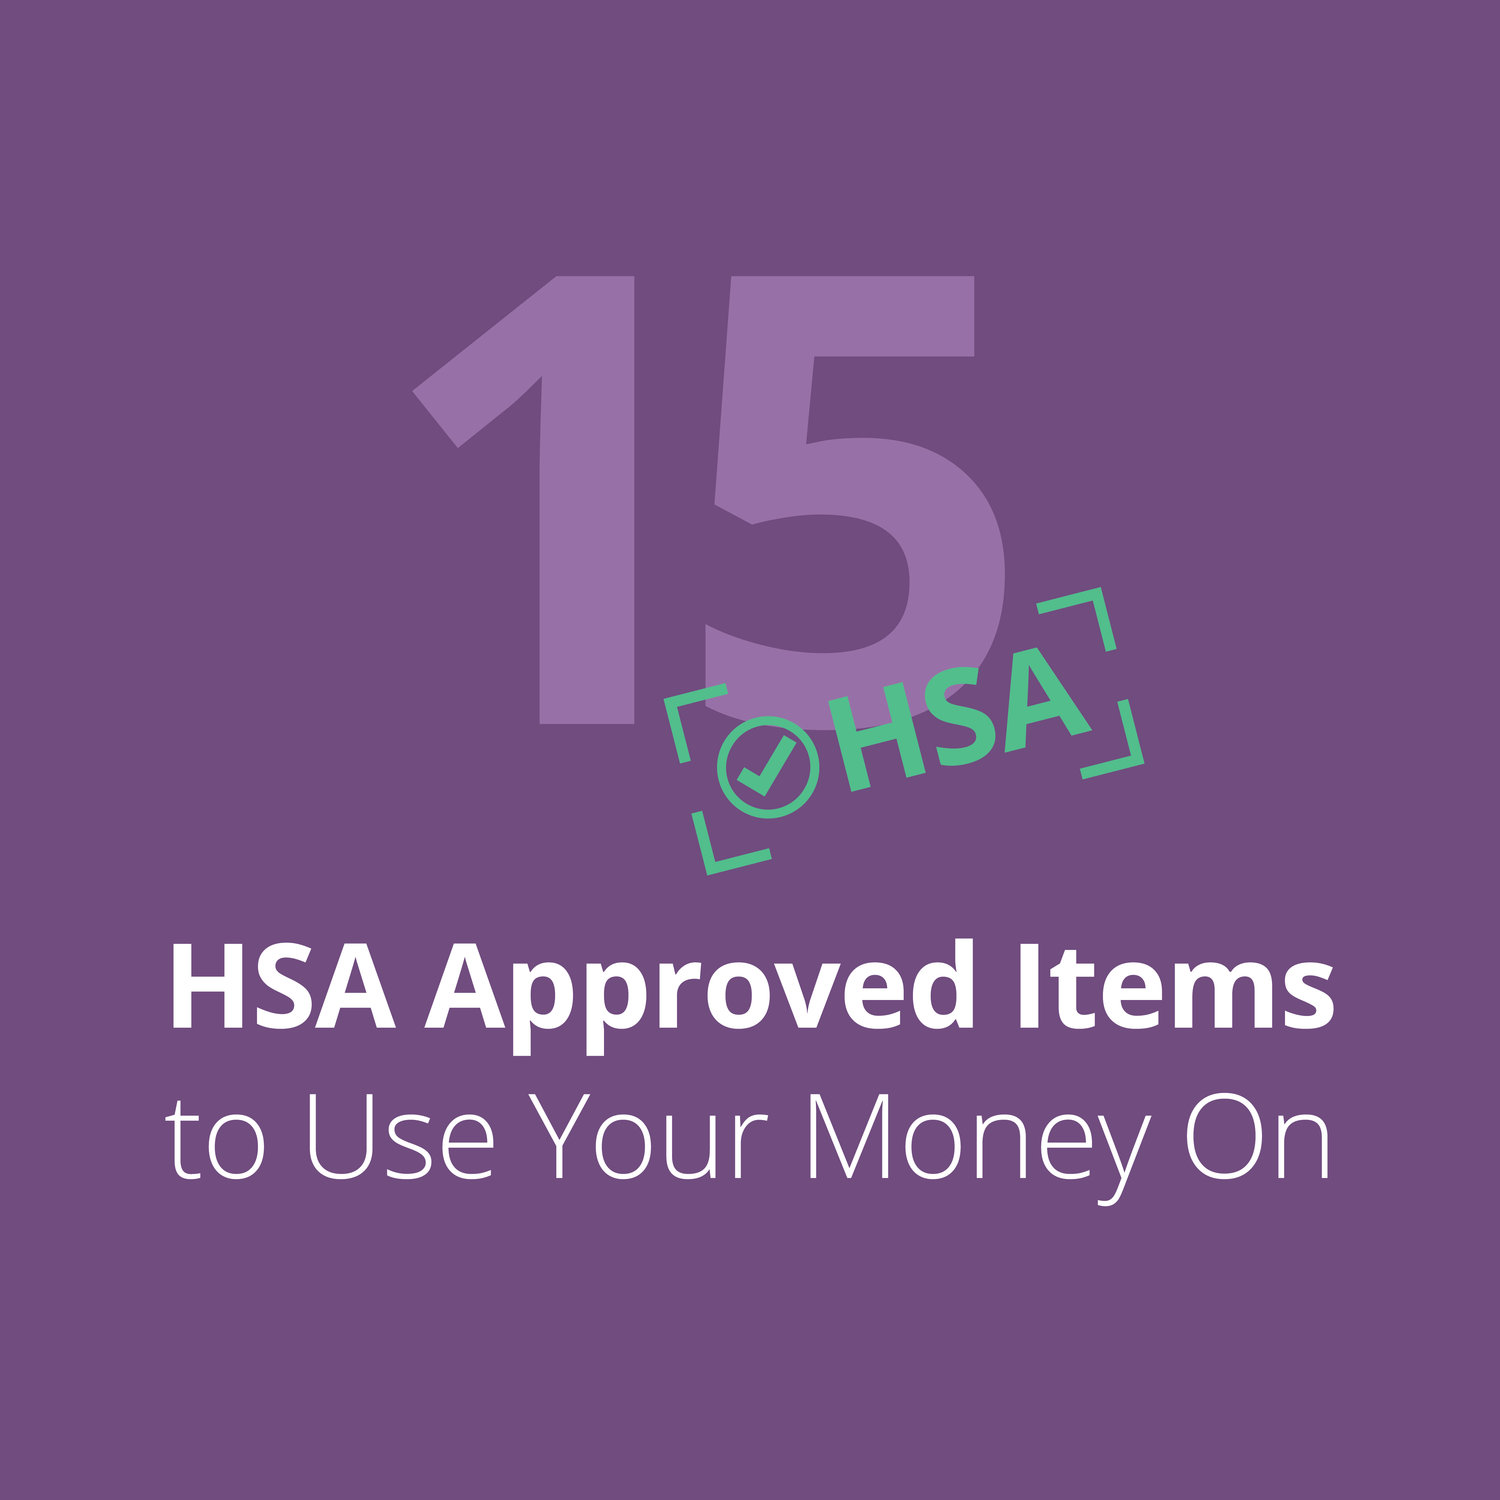 Are Sunglasses FSA / HSA Eligible? [Full List of Approved Expenses]